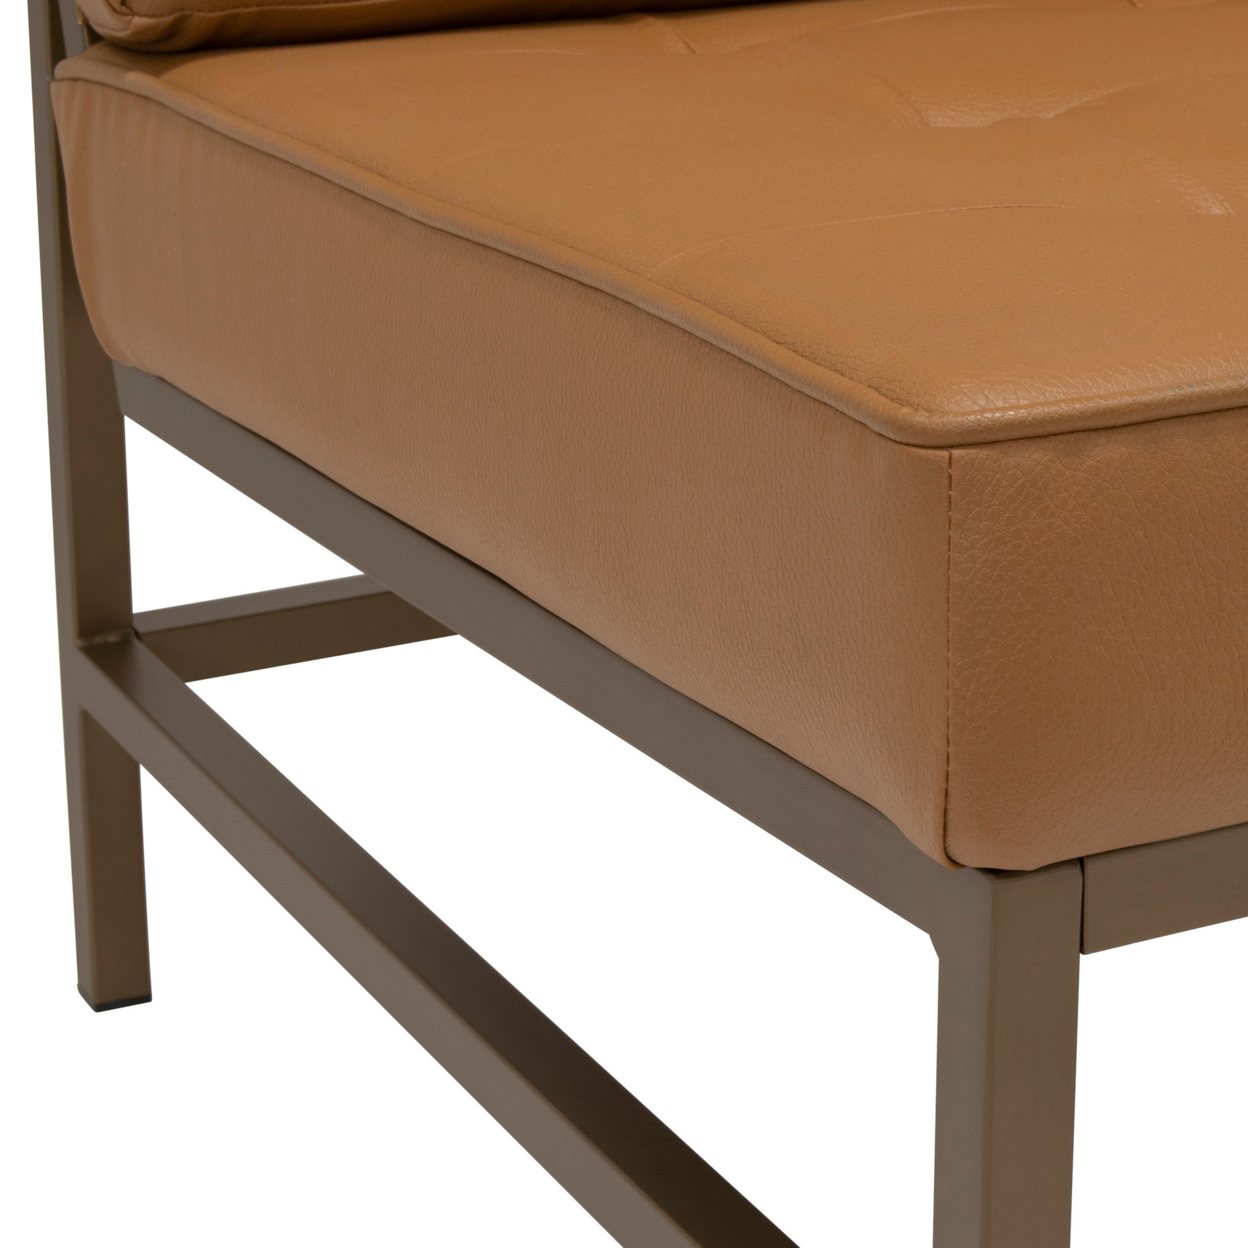 Studio Designs Home Ashlar Plush Tufted Bonded Leather Accent Chair with Woven Webbing Seat - Bronze/Caramel - image 2 of 7